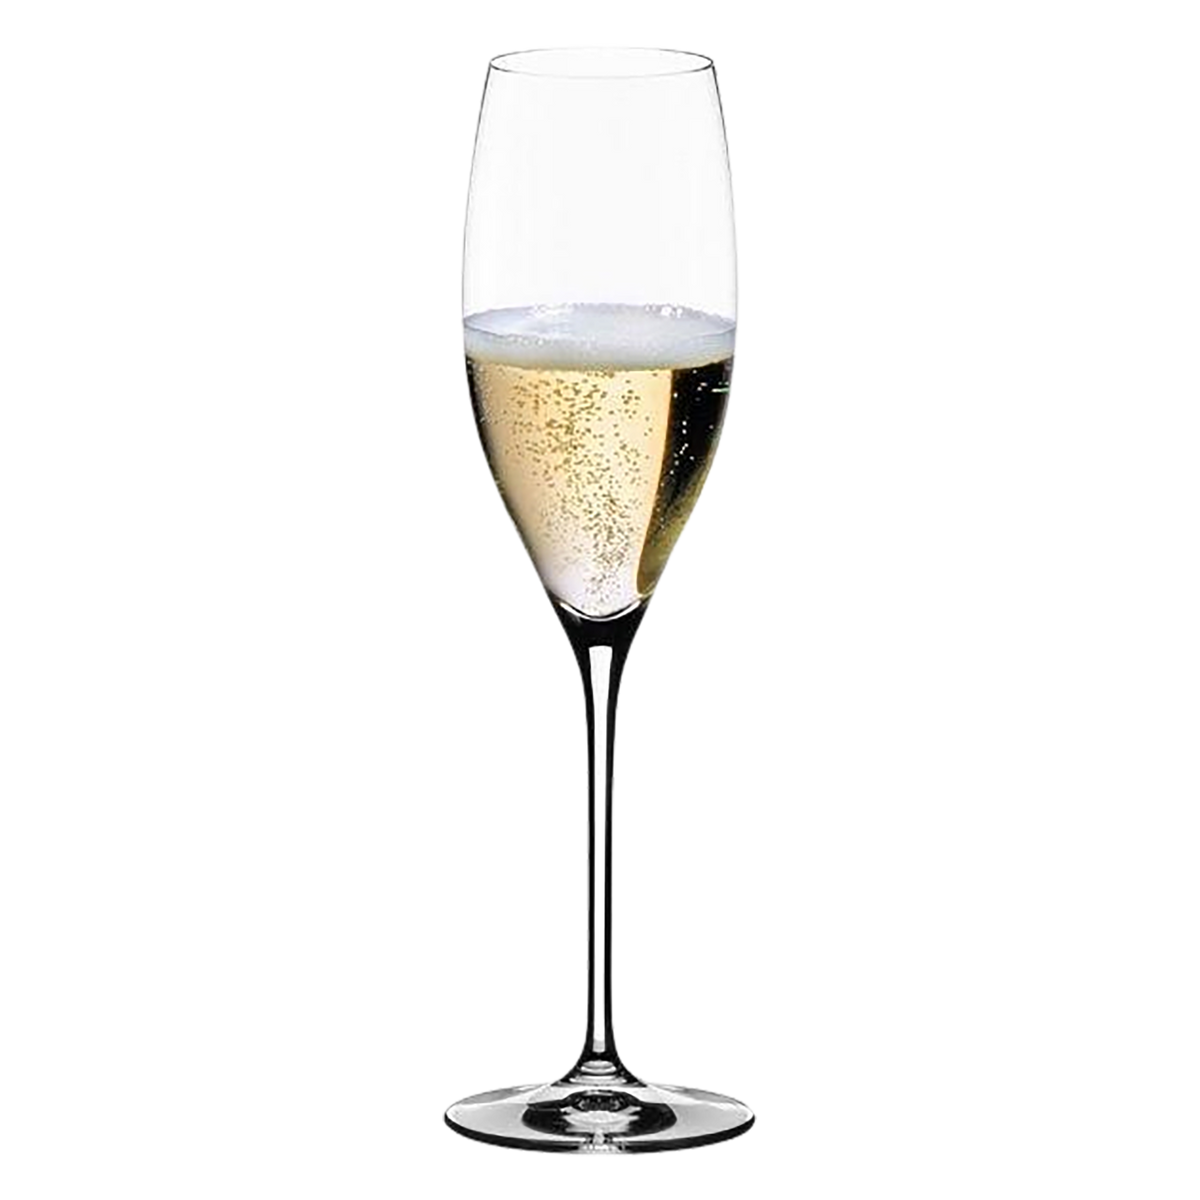 Riedel Fluted Champagne Glasses, Set of 6 Hand Blown Crystal